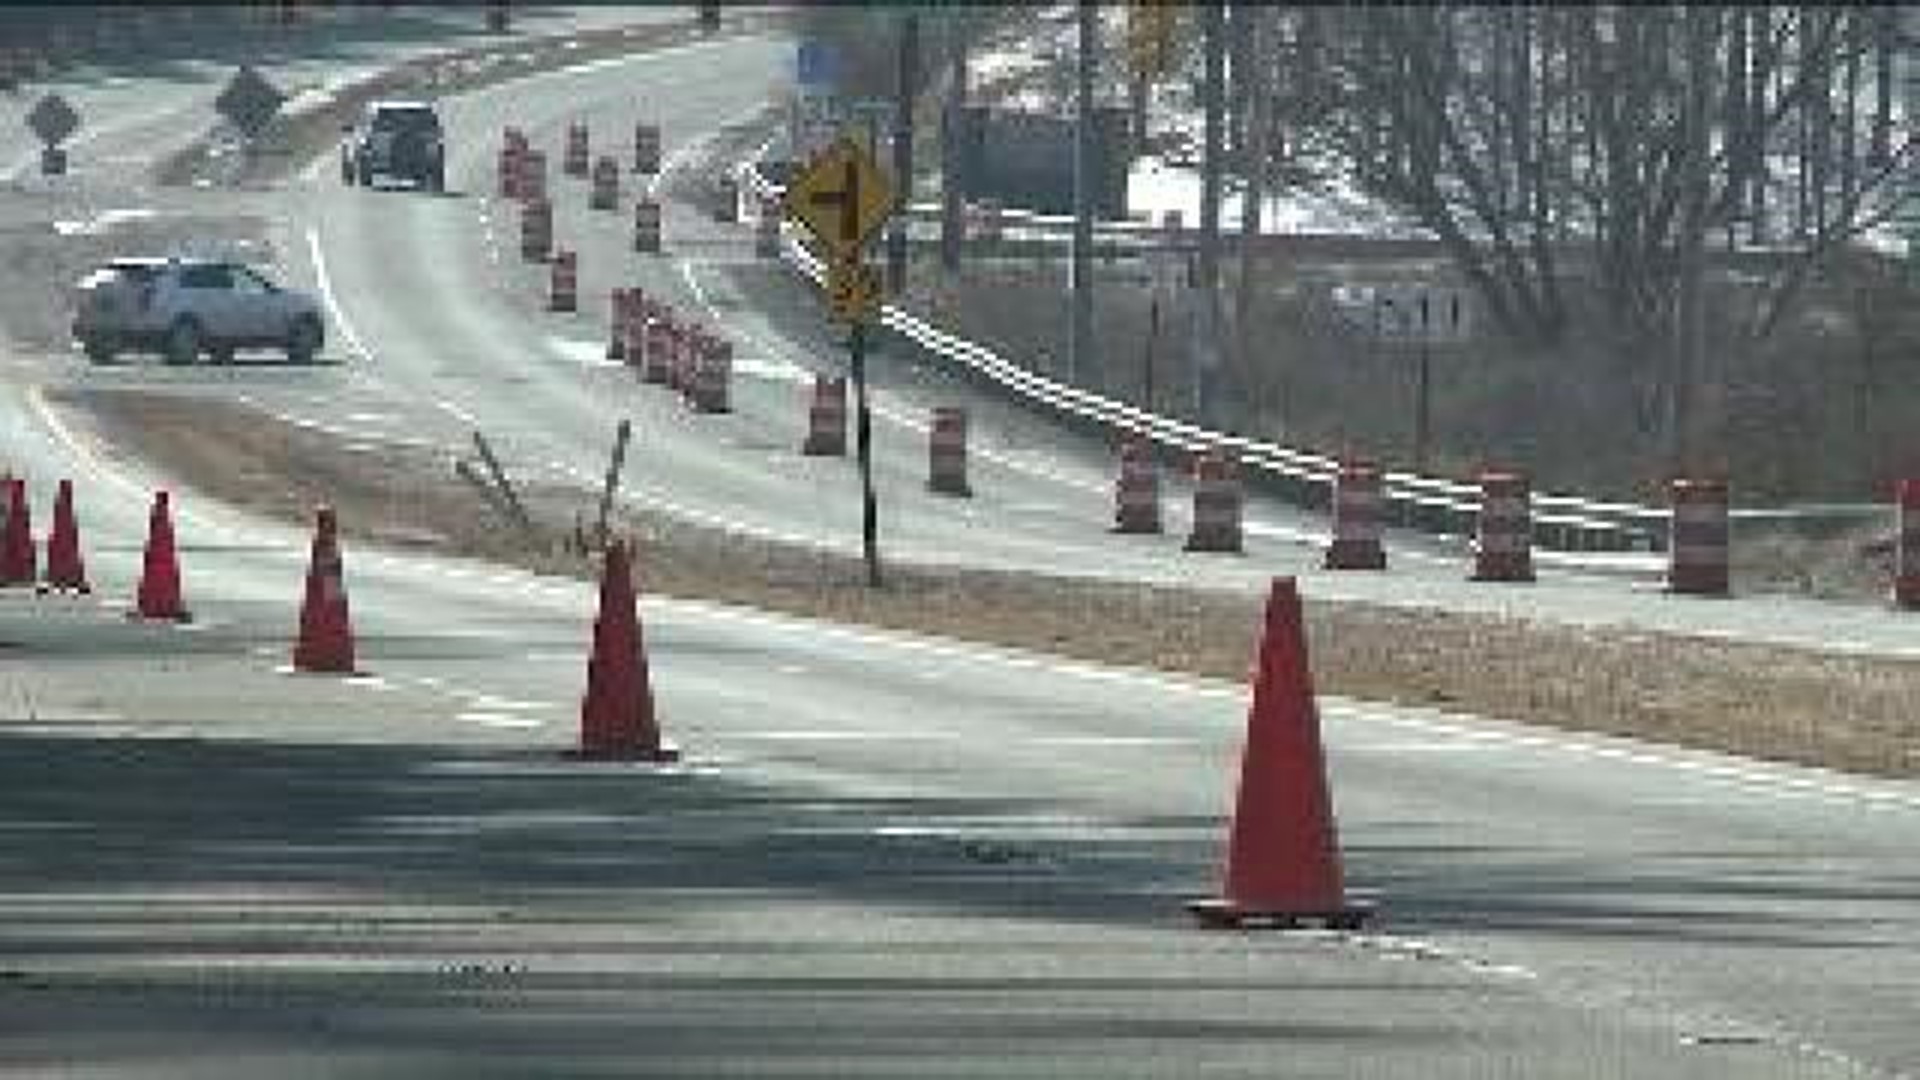 PennDOT: $50 Million For Routes 6 and 11